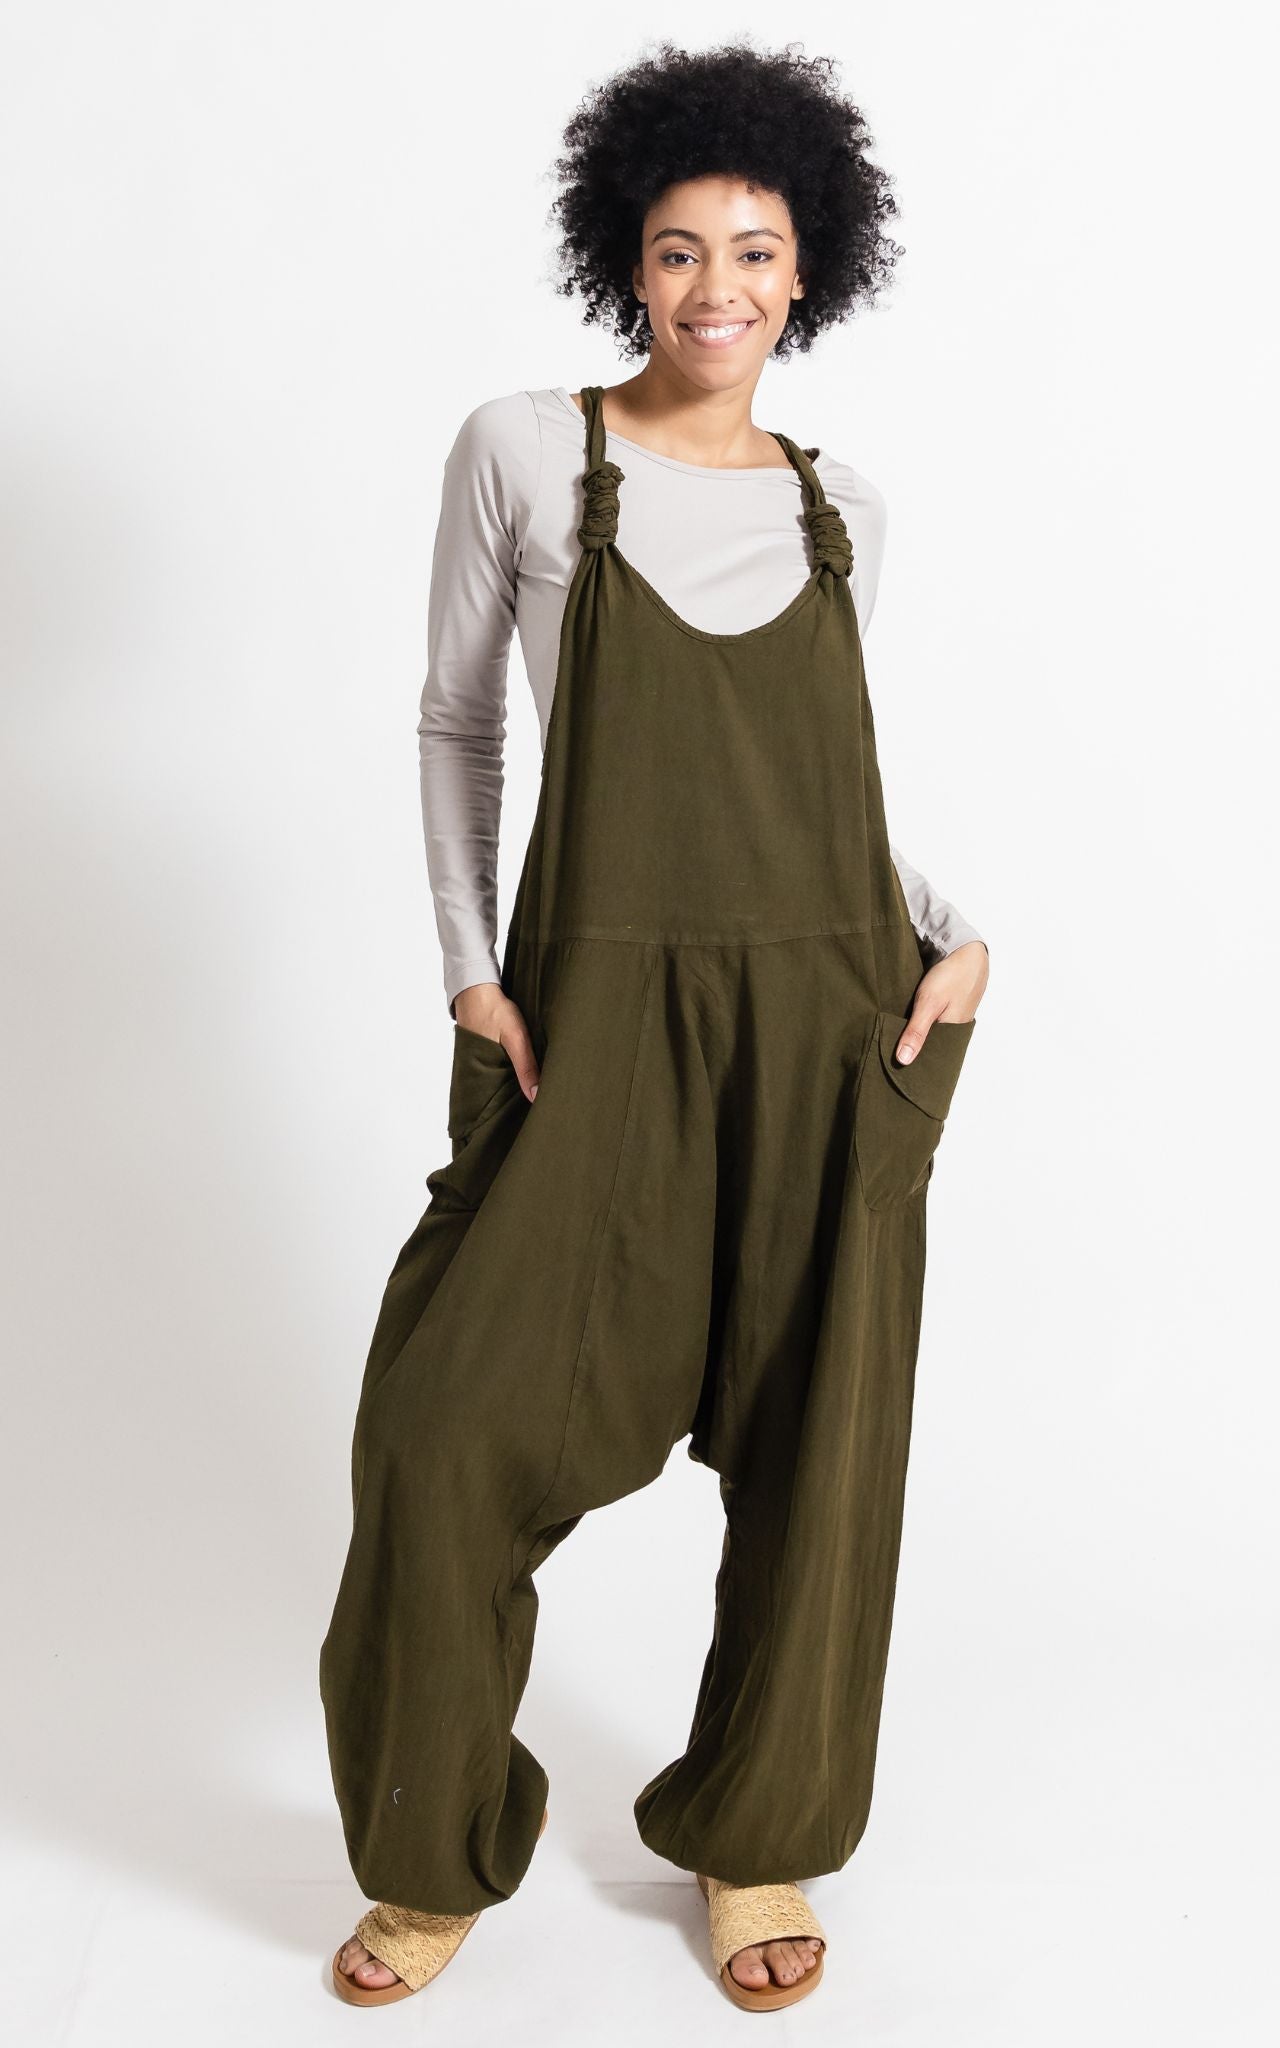 Surya Australia Ethical Cotton long 'Bahini' Overalls made in Nepal - Green